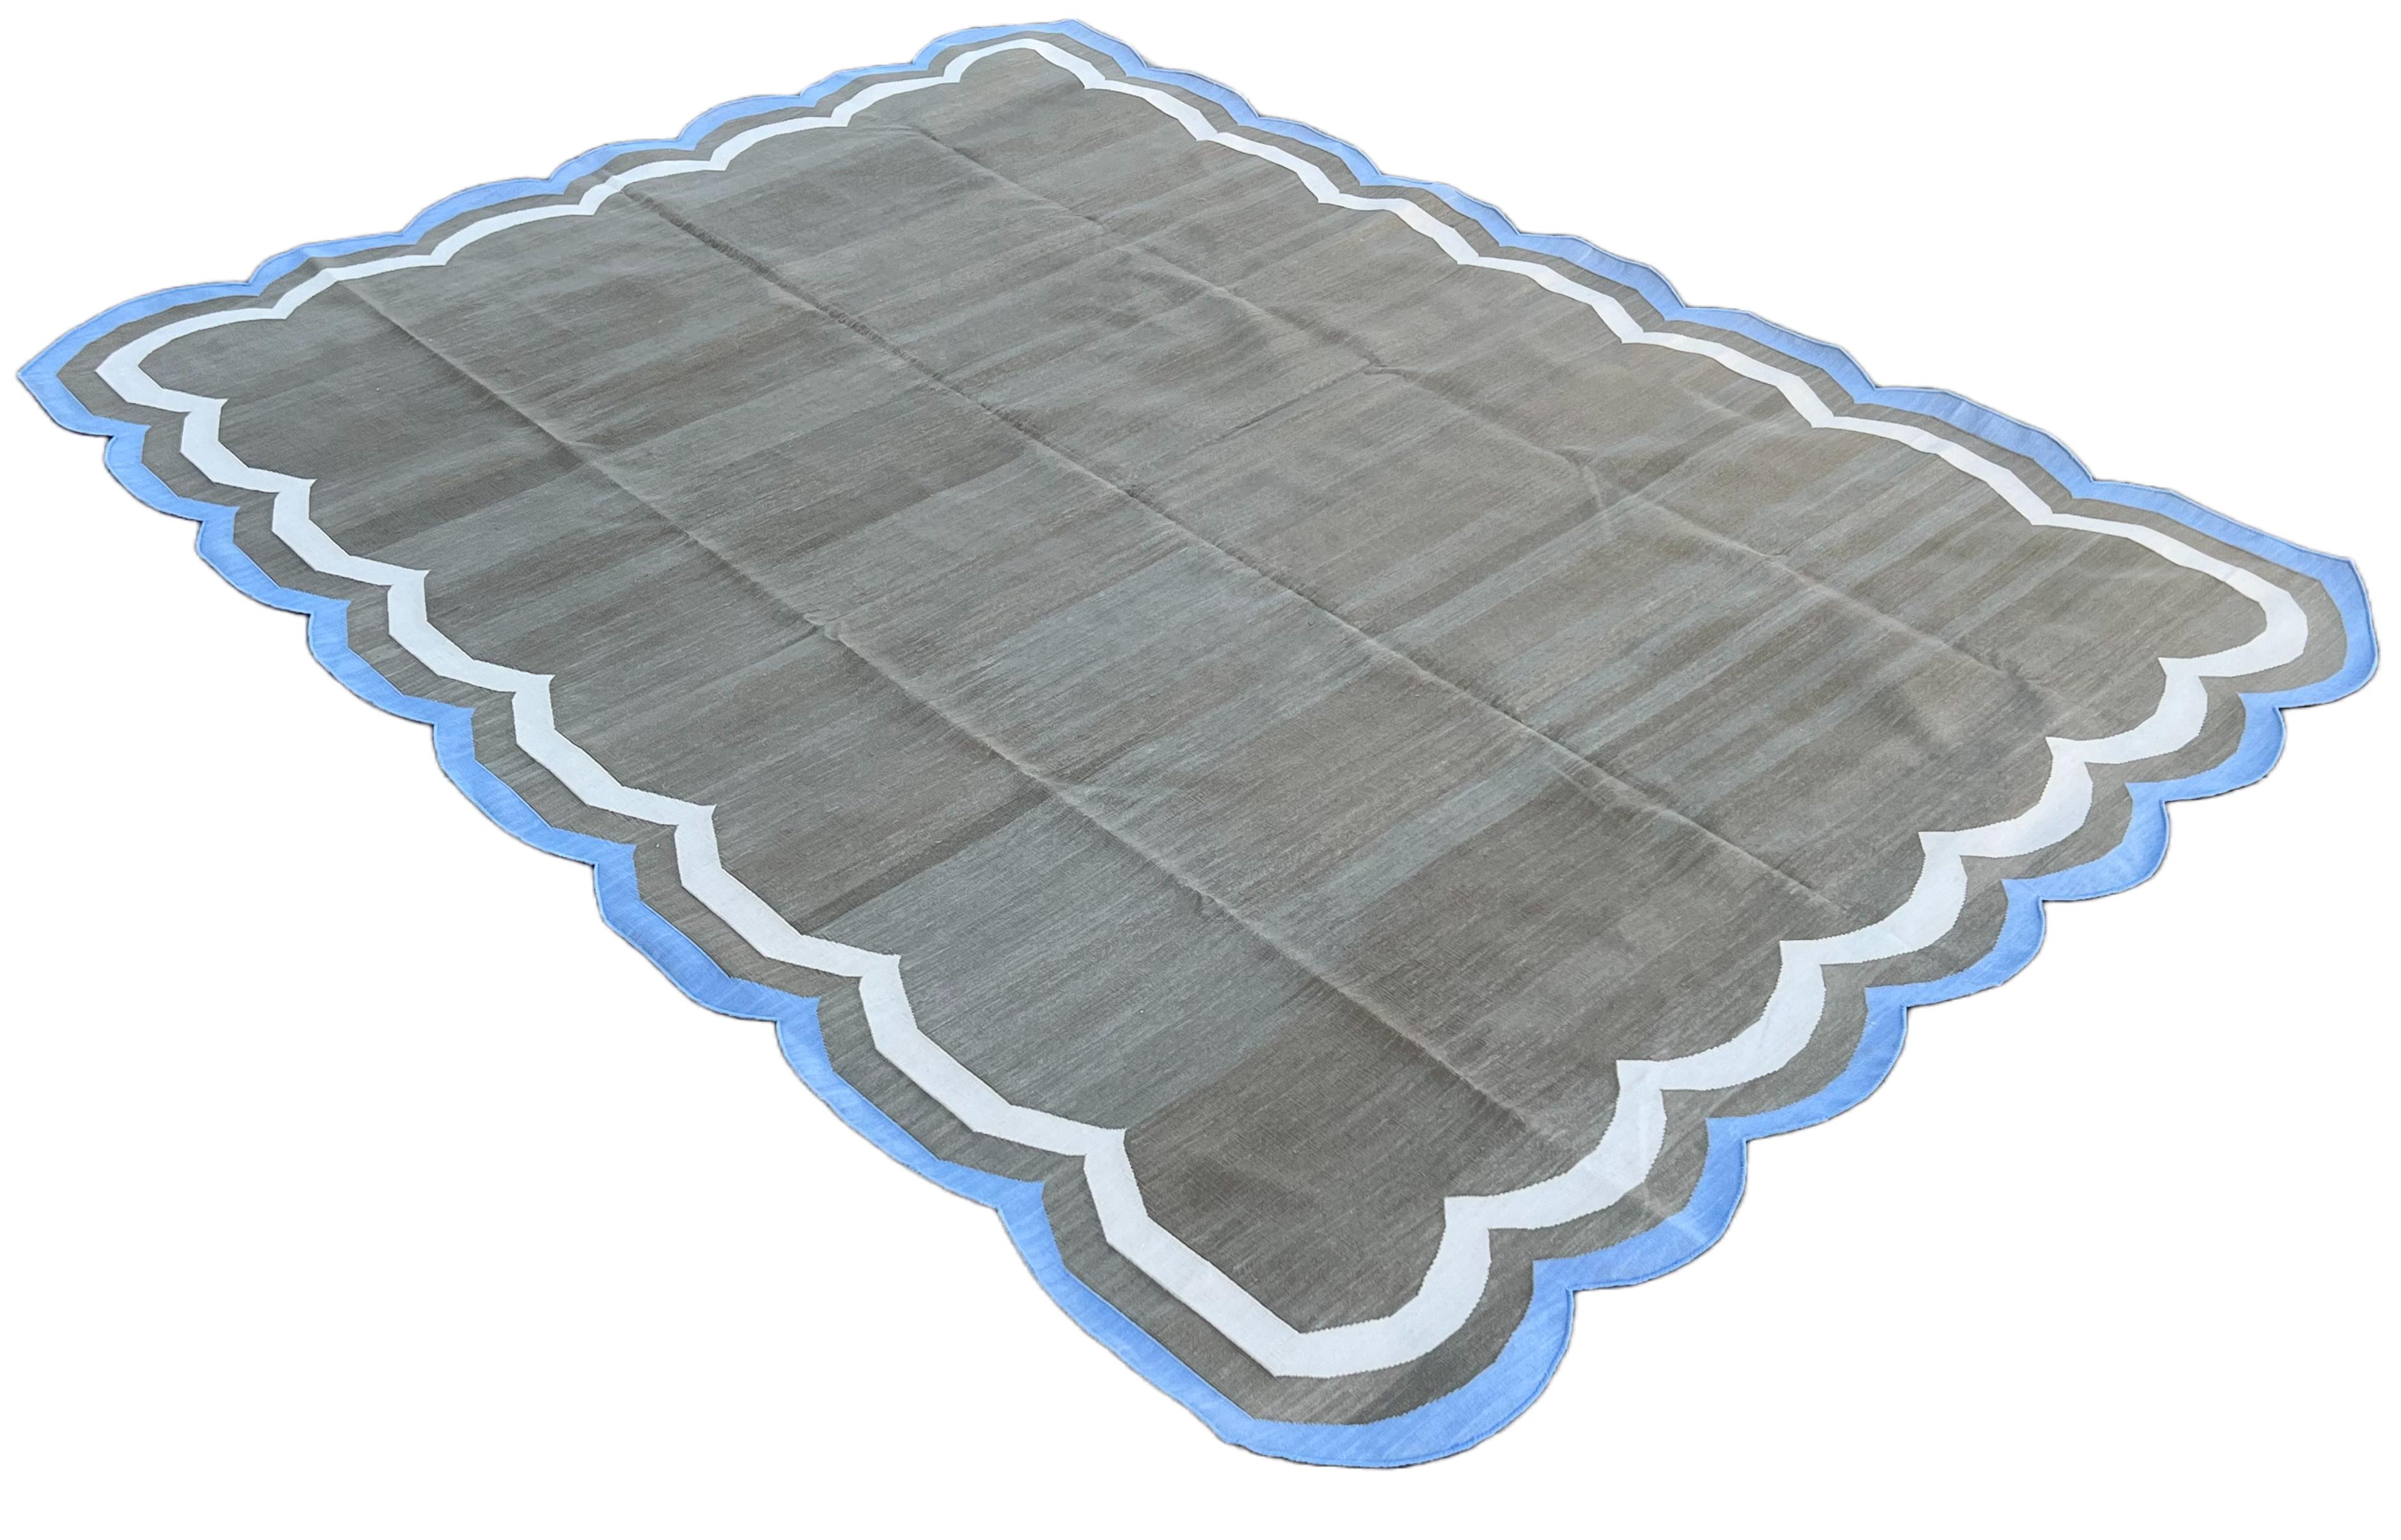 Cotton Vegetable Dyed Brown and Light Blue 4 Sided Indian Scalloped Rug - 8'x10'
These special flat-weave dhurries are hand-woven with 15 ply 100% cotton yarn. Due to the special manufacturing techniques used to create our rugs, the size and color